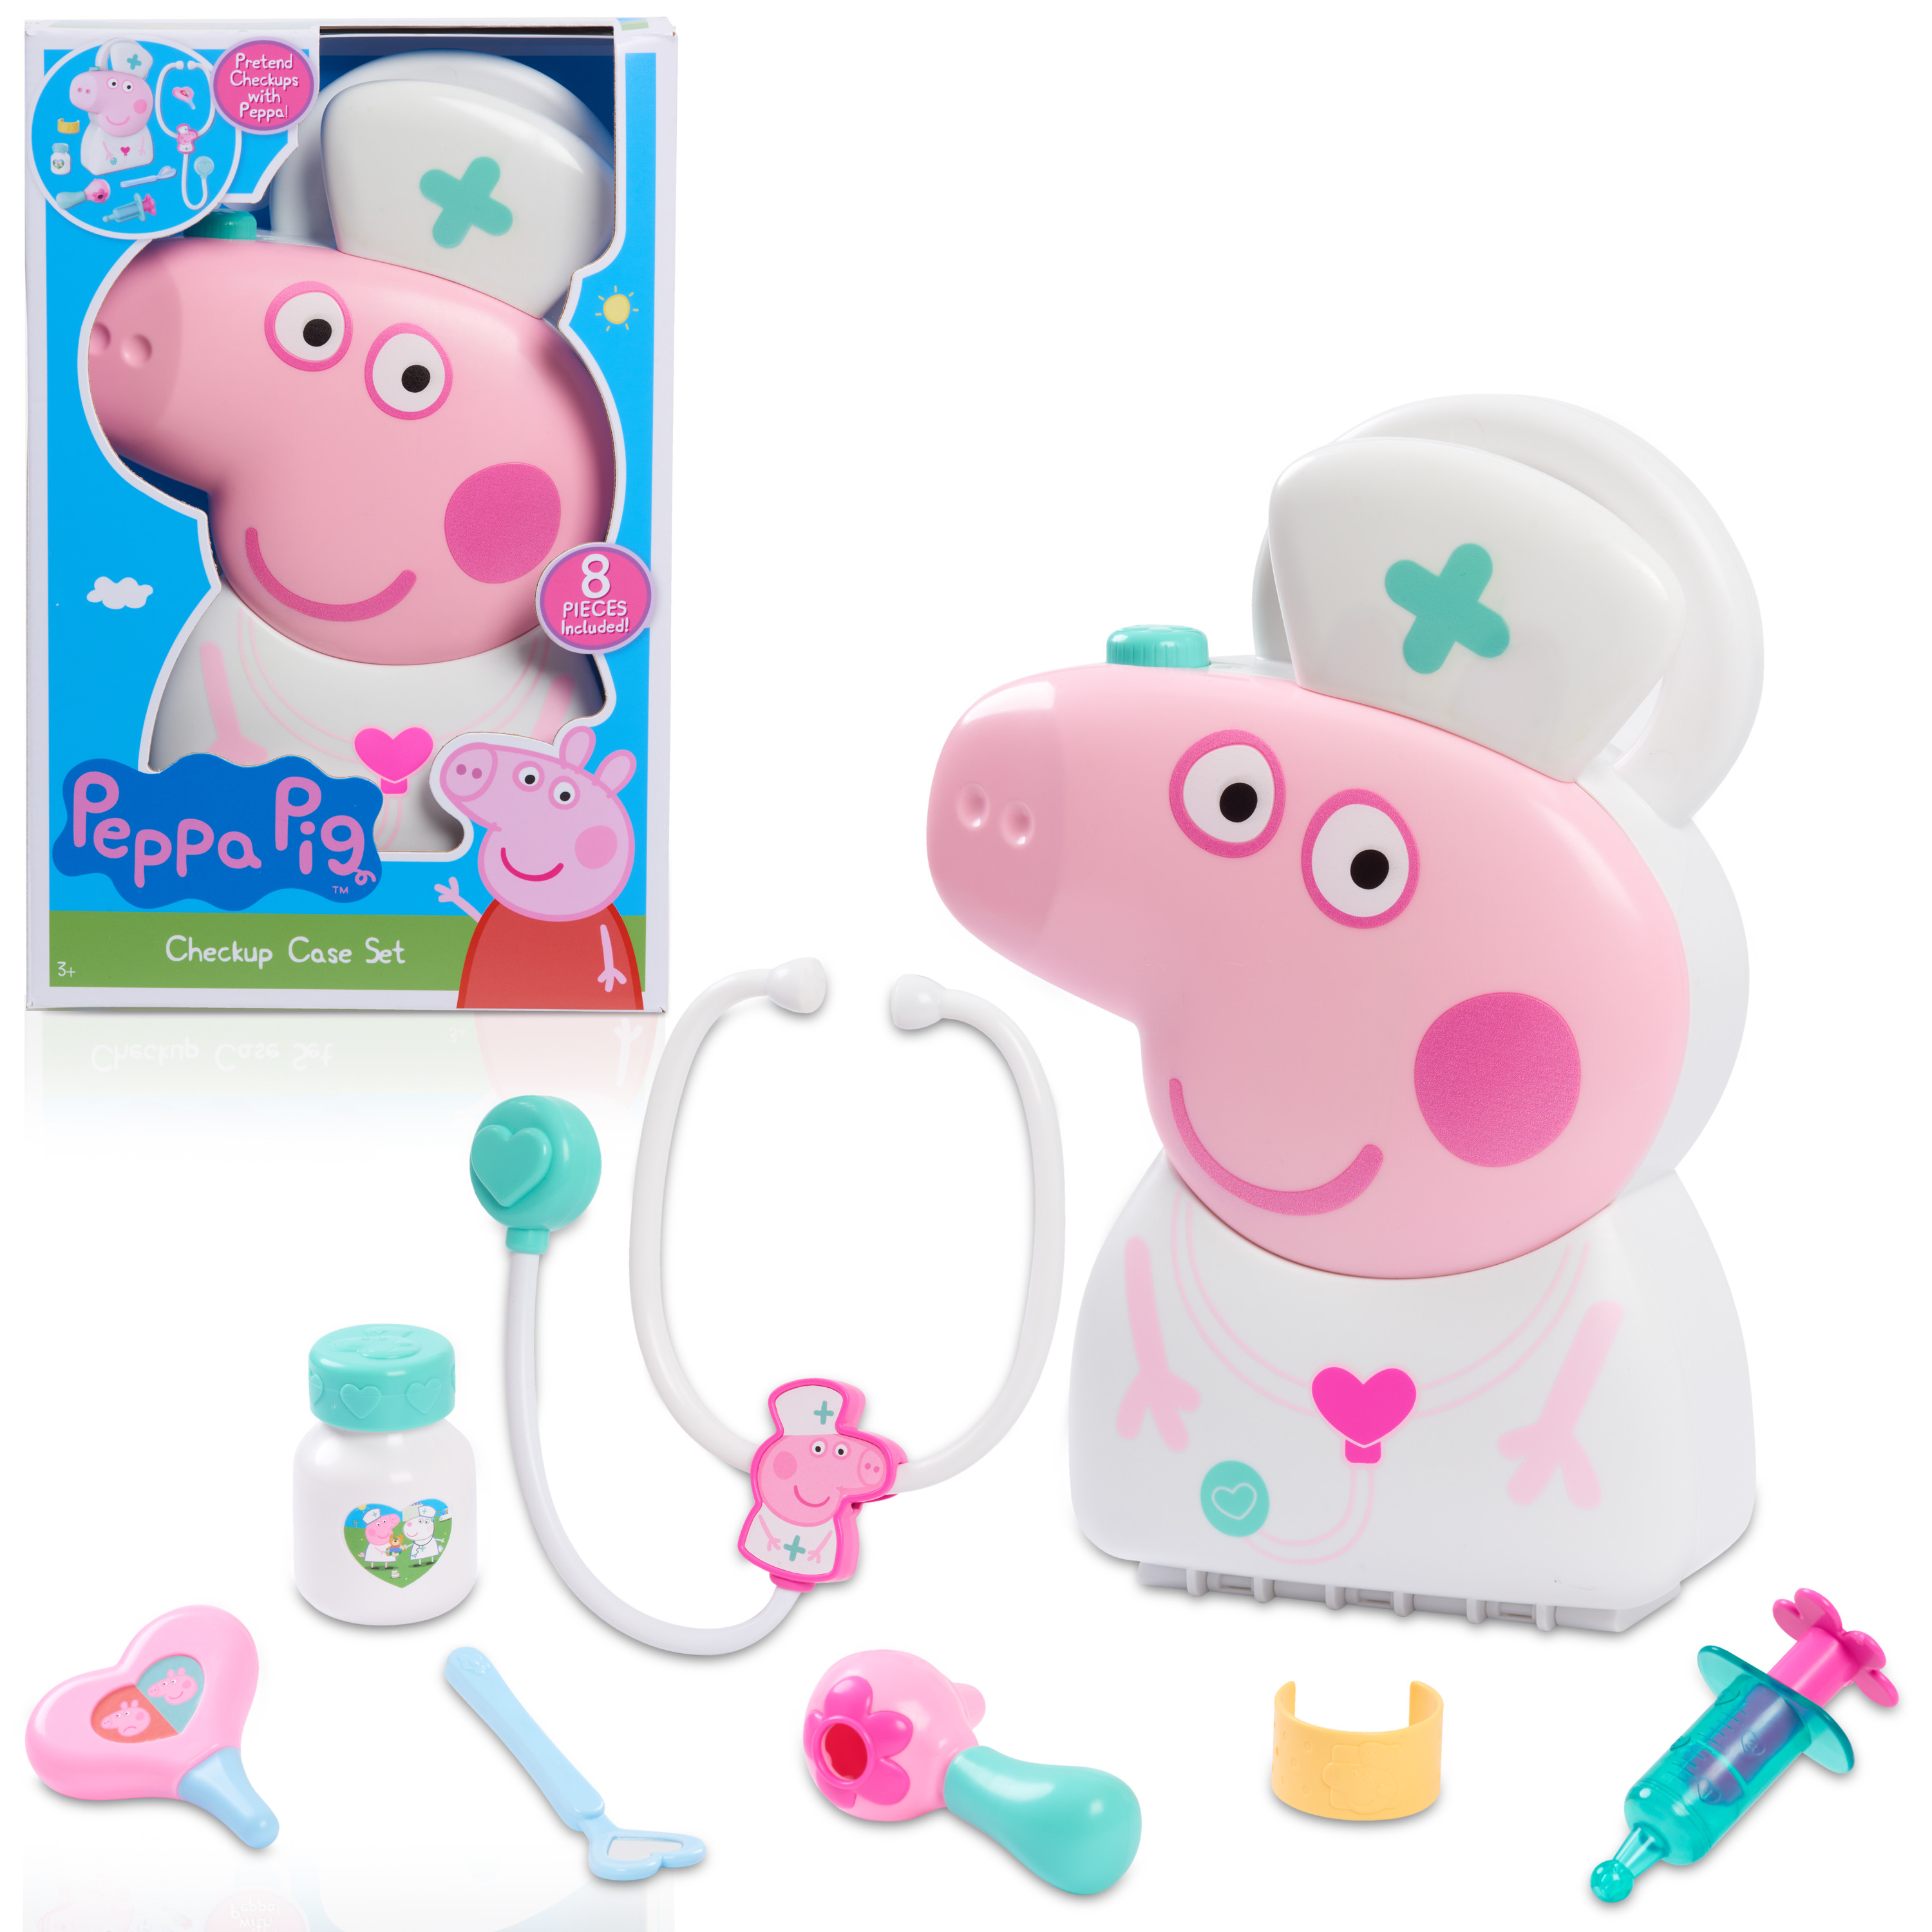 Peppa Pig, Doctor Kit Playset, Baby and Toddler Toy - image 1 of 8